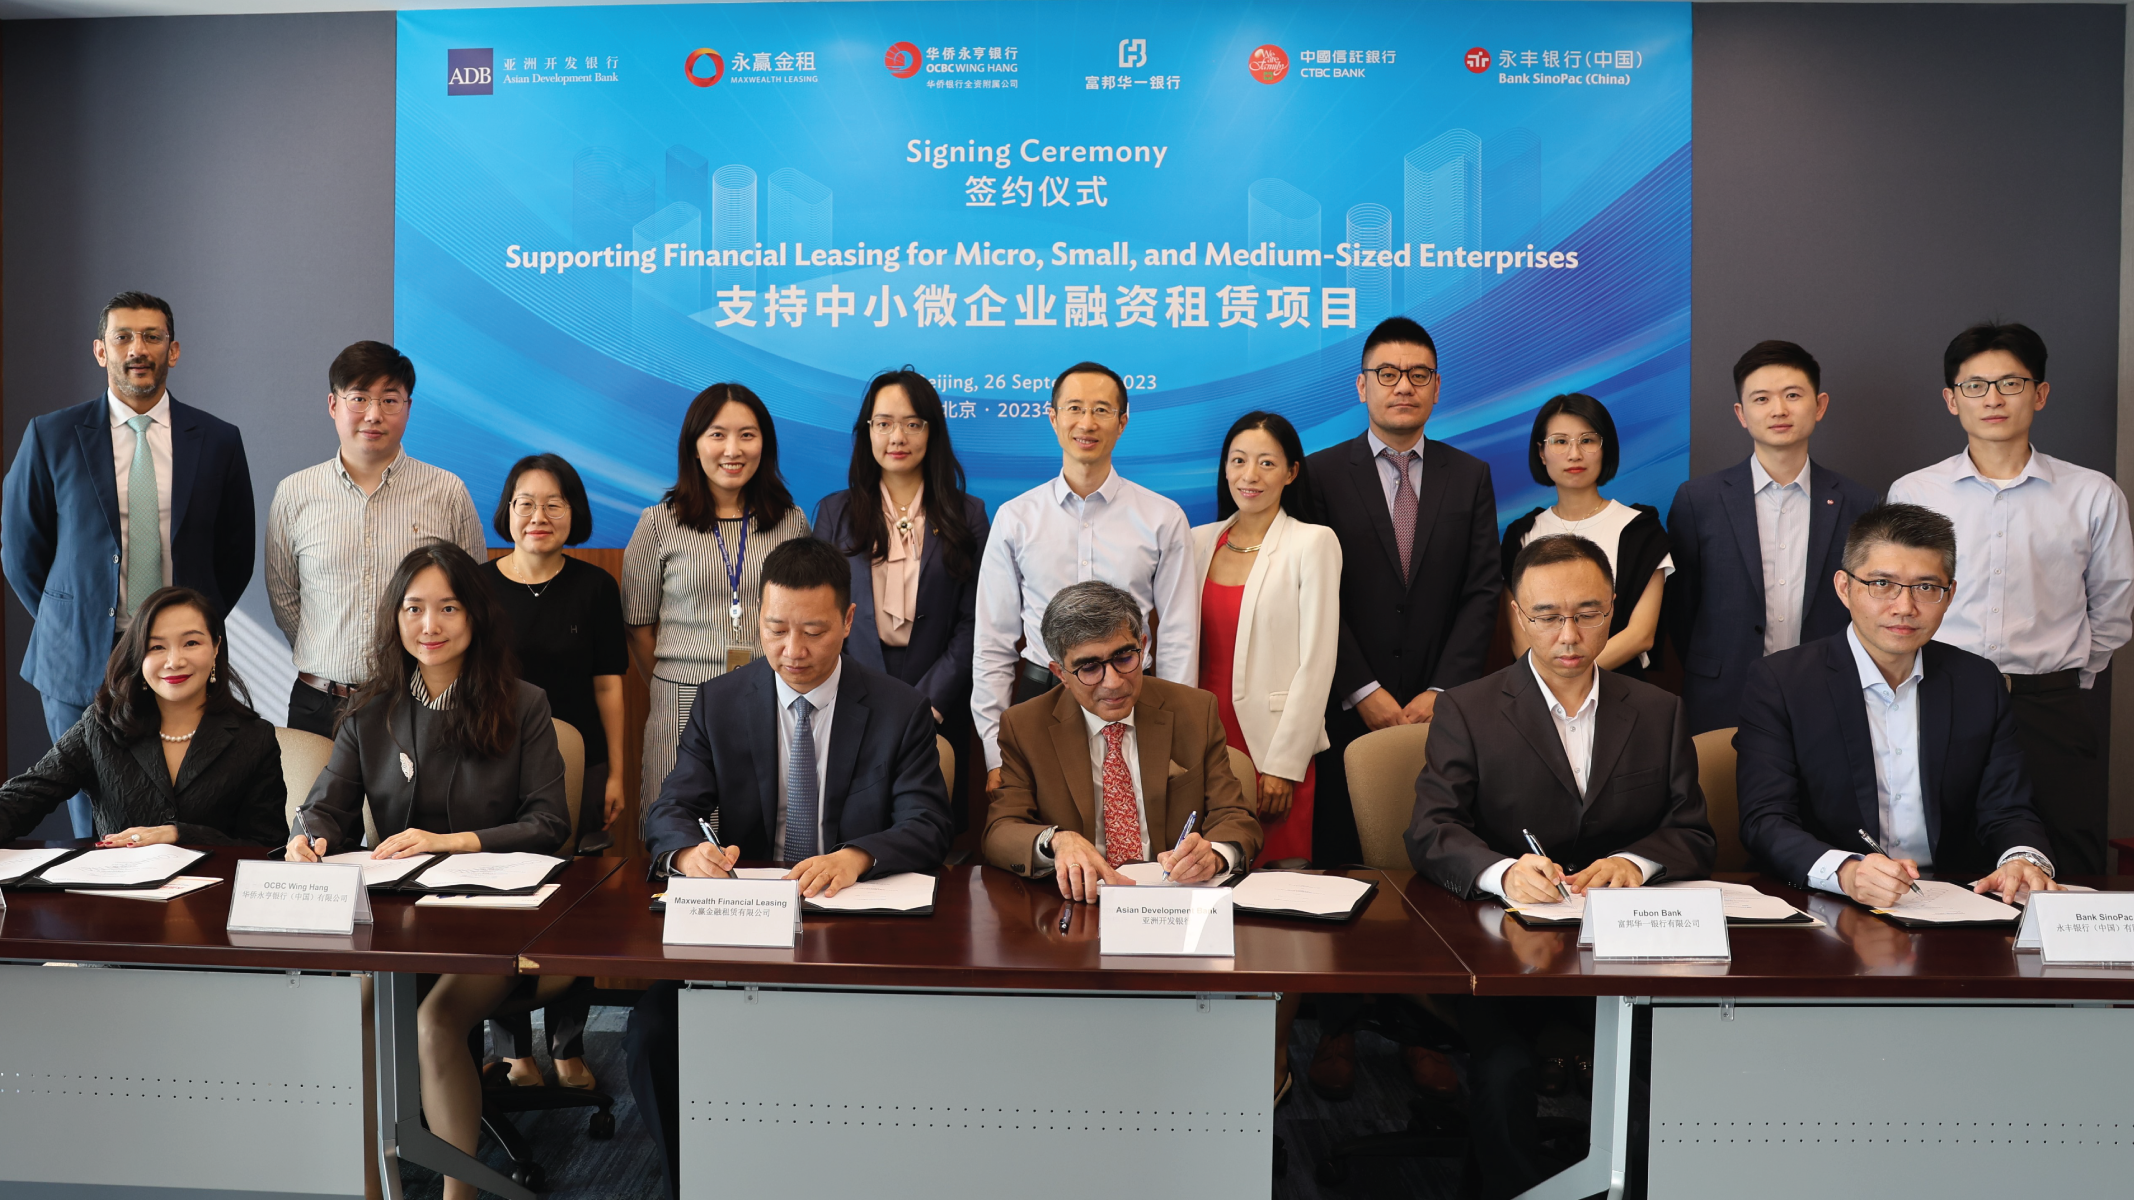 The Asian Development Bank (ADB) and Maxwealth have inked a CNY 1 billion agreement aimed at broadening access to lease financing for Micro, Small, and Medium-sized Enterprises (MSMEs) in the People’s Republic of China (PRC)